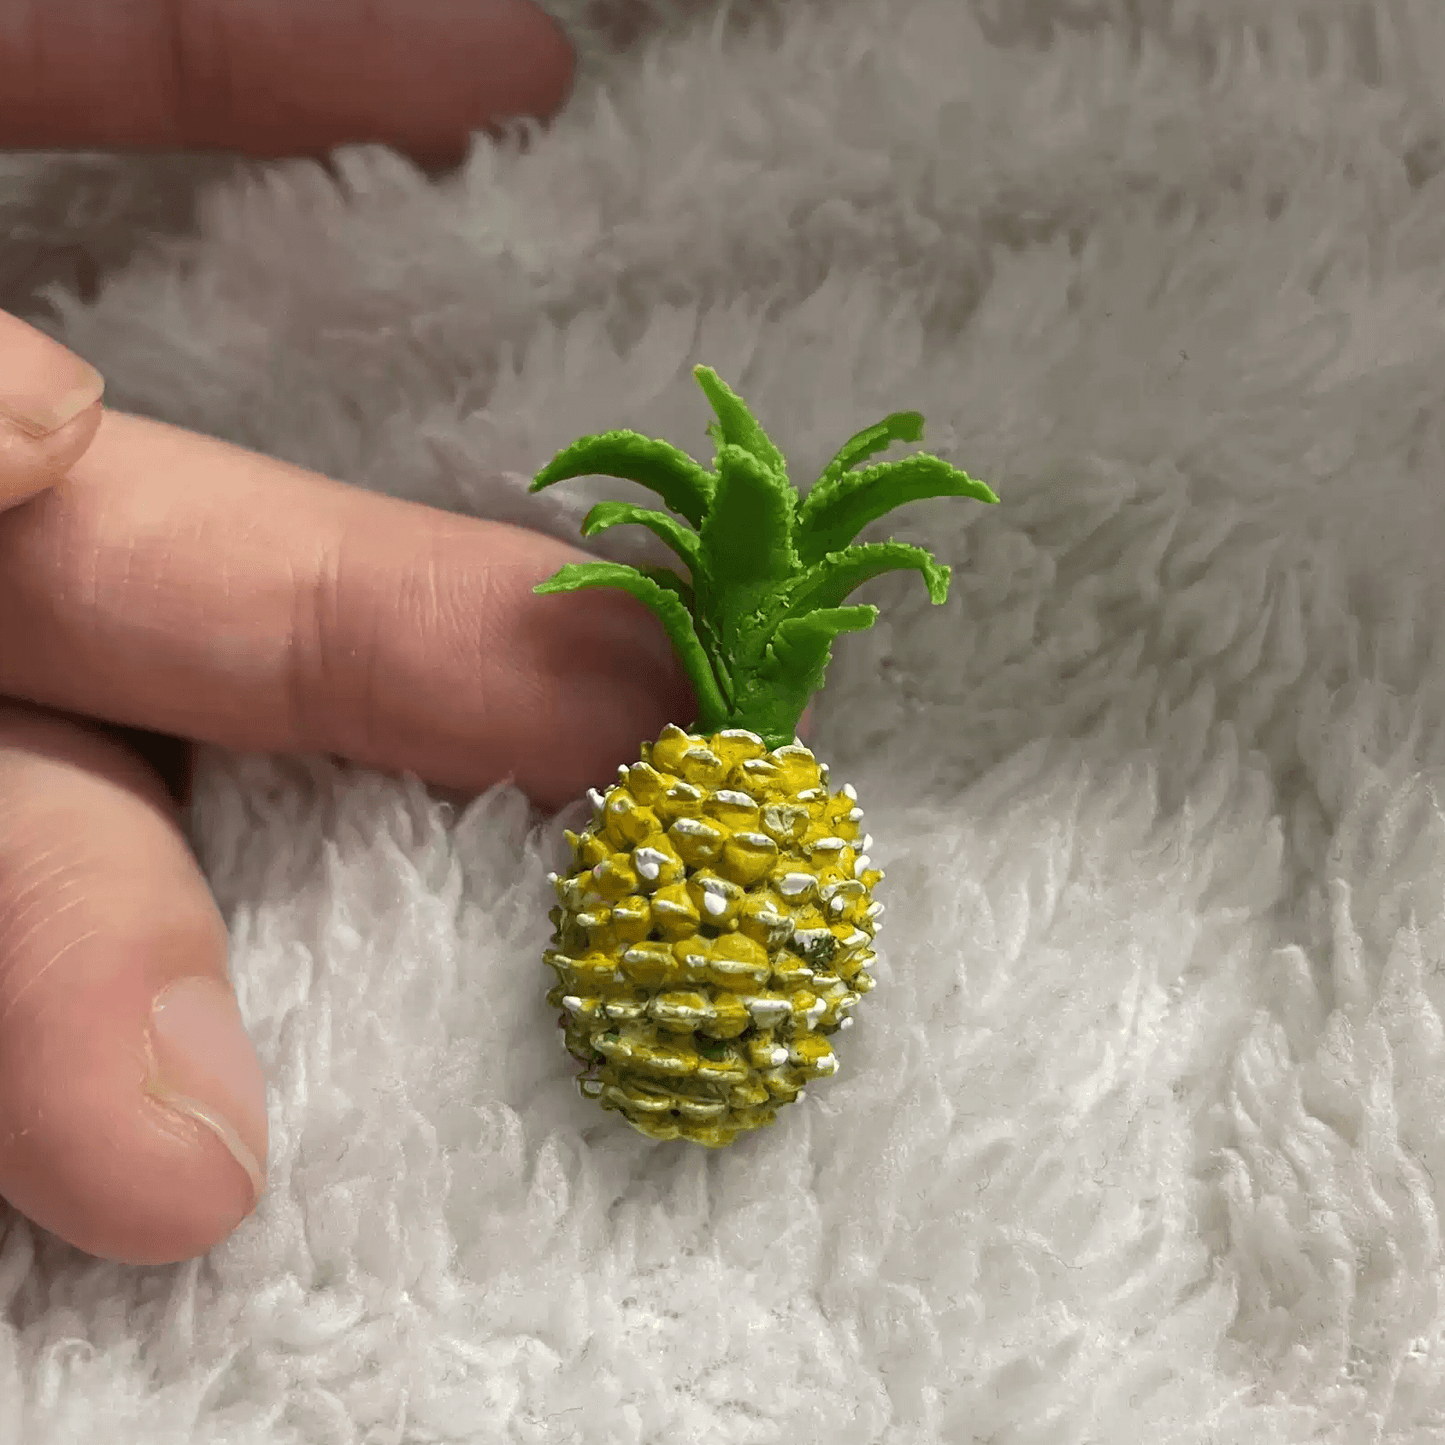 This miniature fruit Pineapple would be a wonderful addition to any doll's house kitchen or dining room table. Miniature fruits for dollhouse. Miniature Pineapple handmade from clay. Miniature fruits in 1/6 and 1/12 scale can be used in doll kitchen, doll grocery store, doll food, collection, diorama decoration.